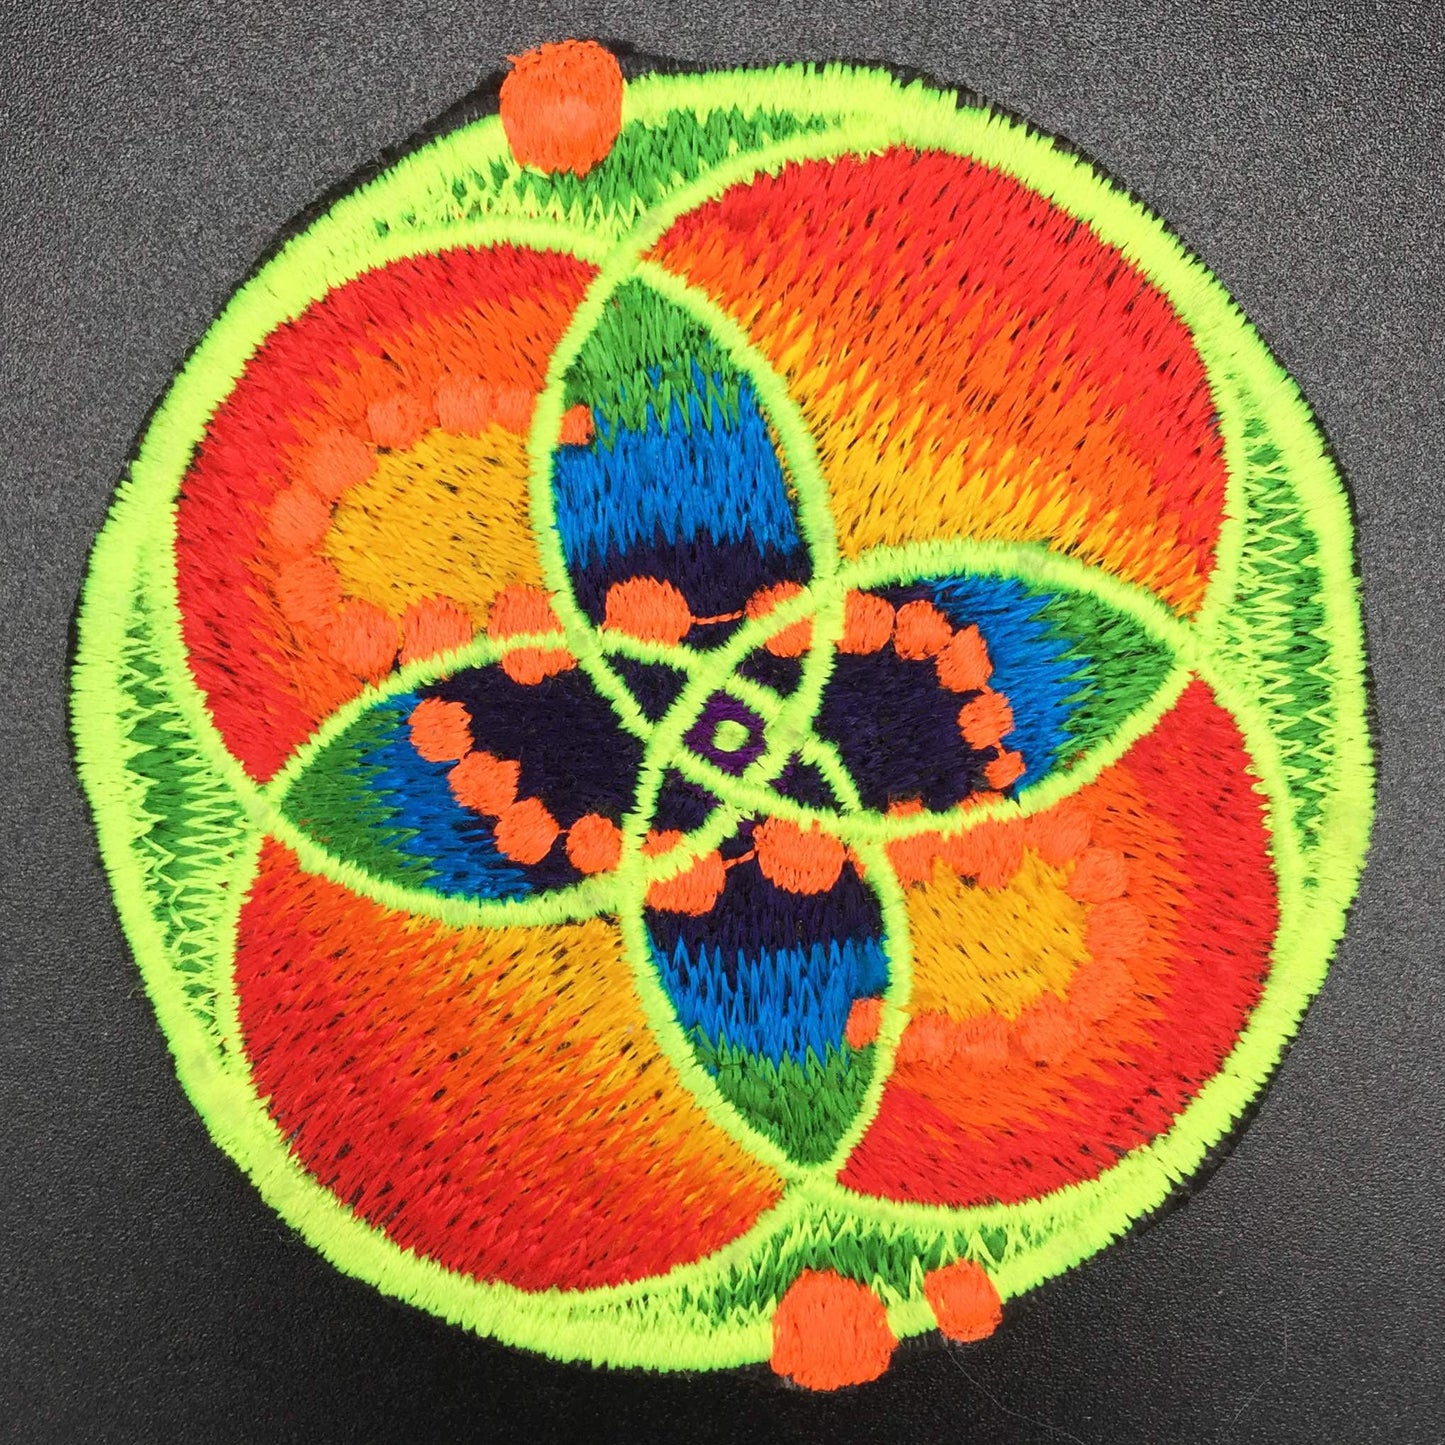 DNA healing crop circle patch - 3.5 inches blacklight glowing sew on embroidery - sacred geometry of healing life through the flower of life